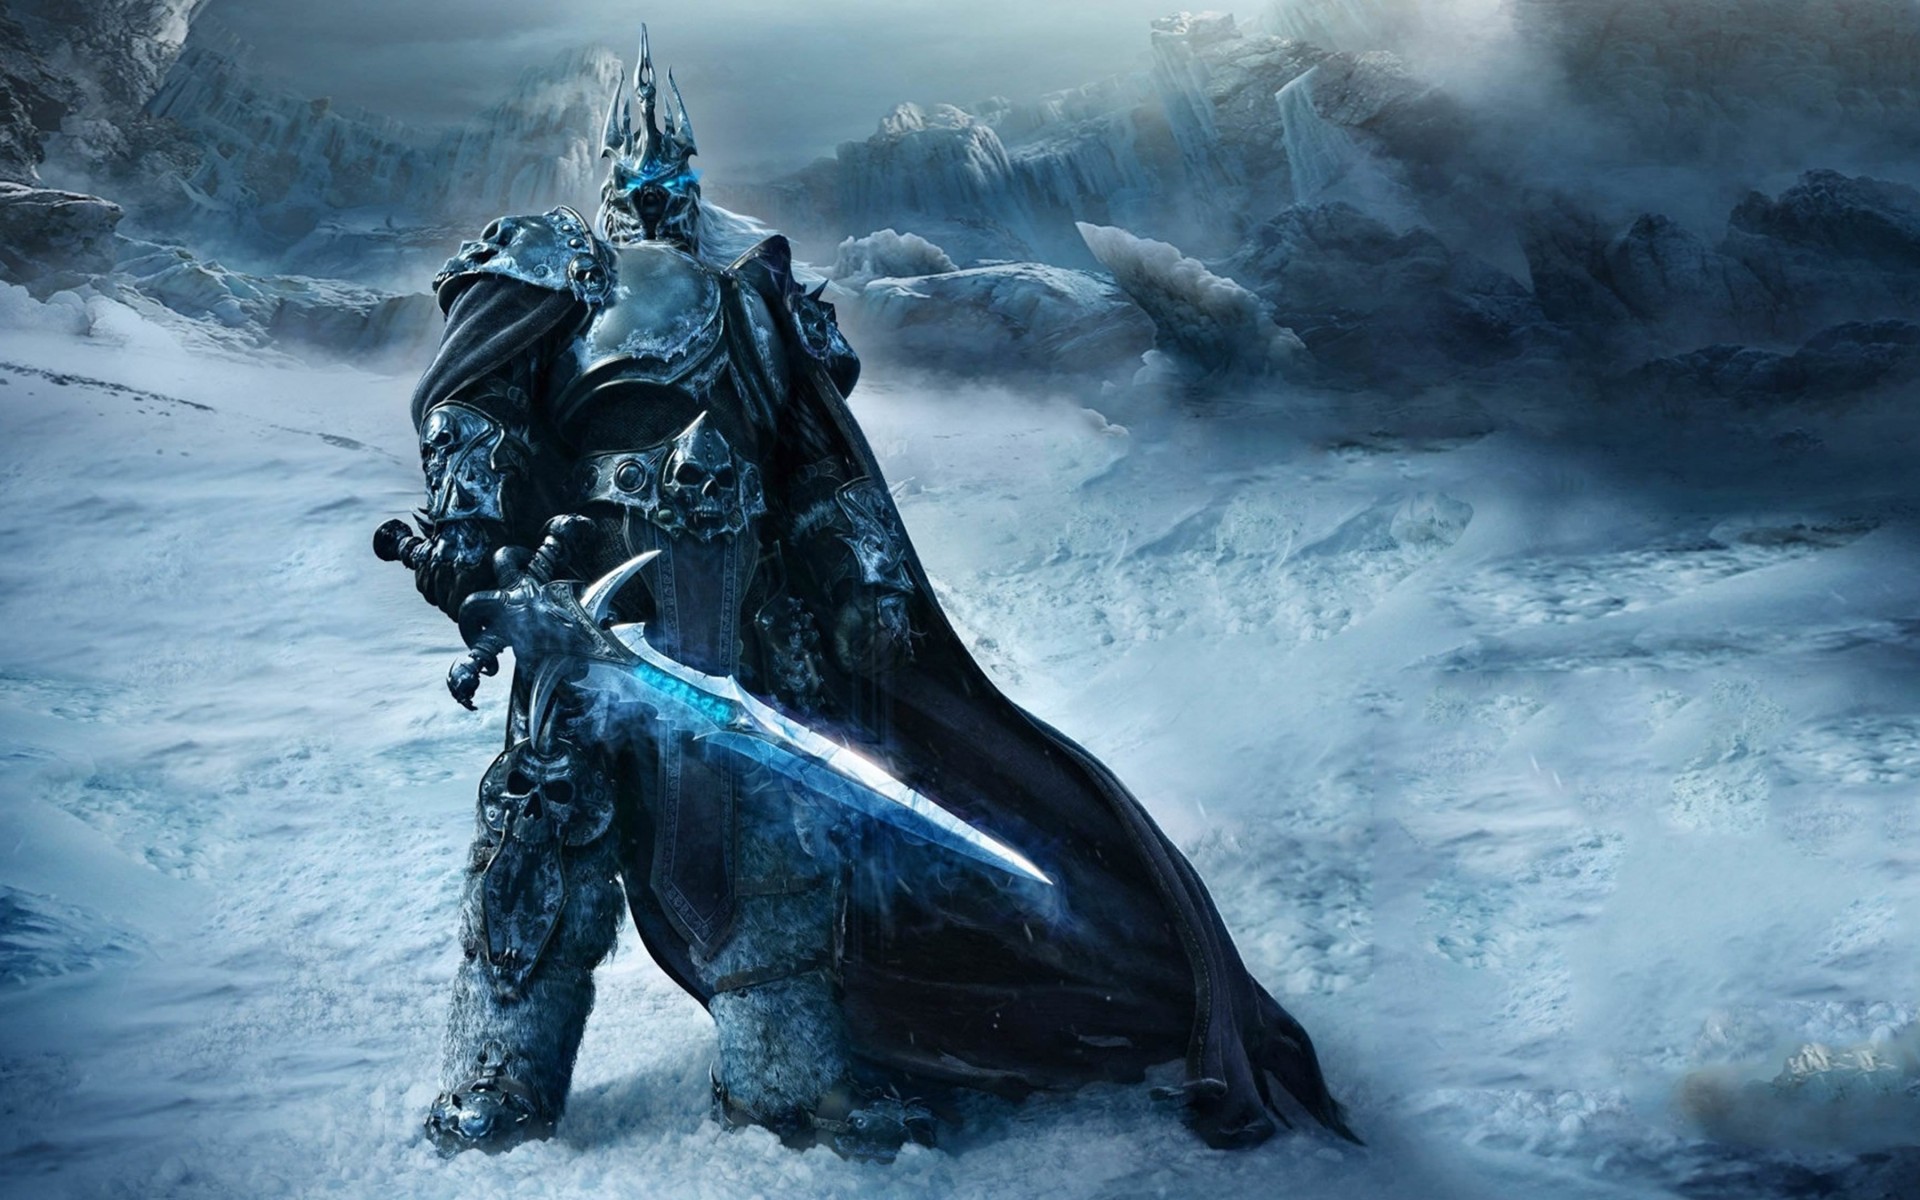 World of Warcraft: Wrath of the Lich King Wallpaper for Desktop 1920x1200